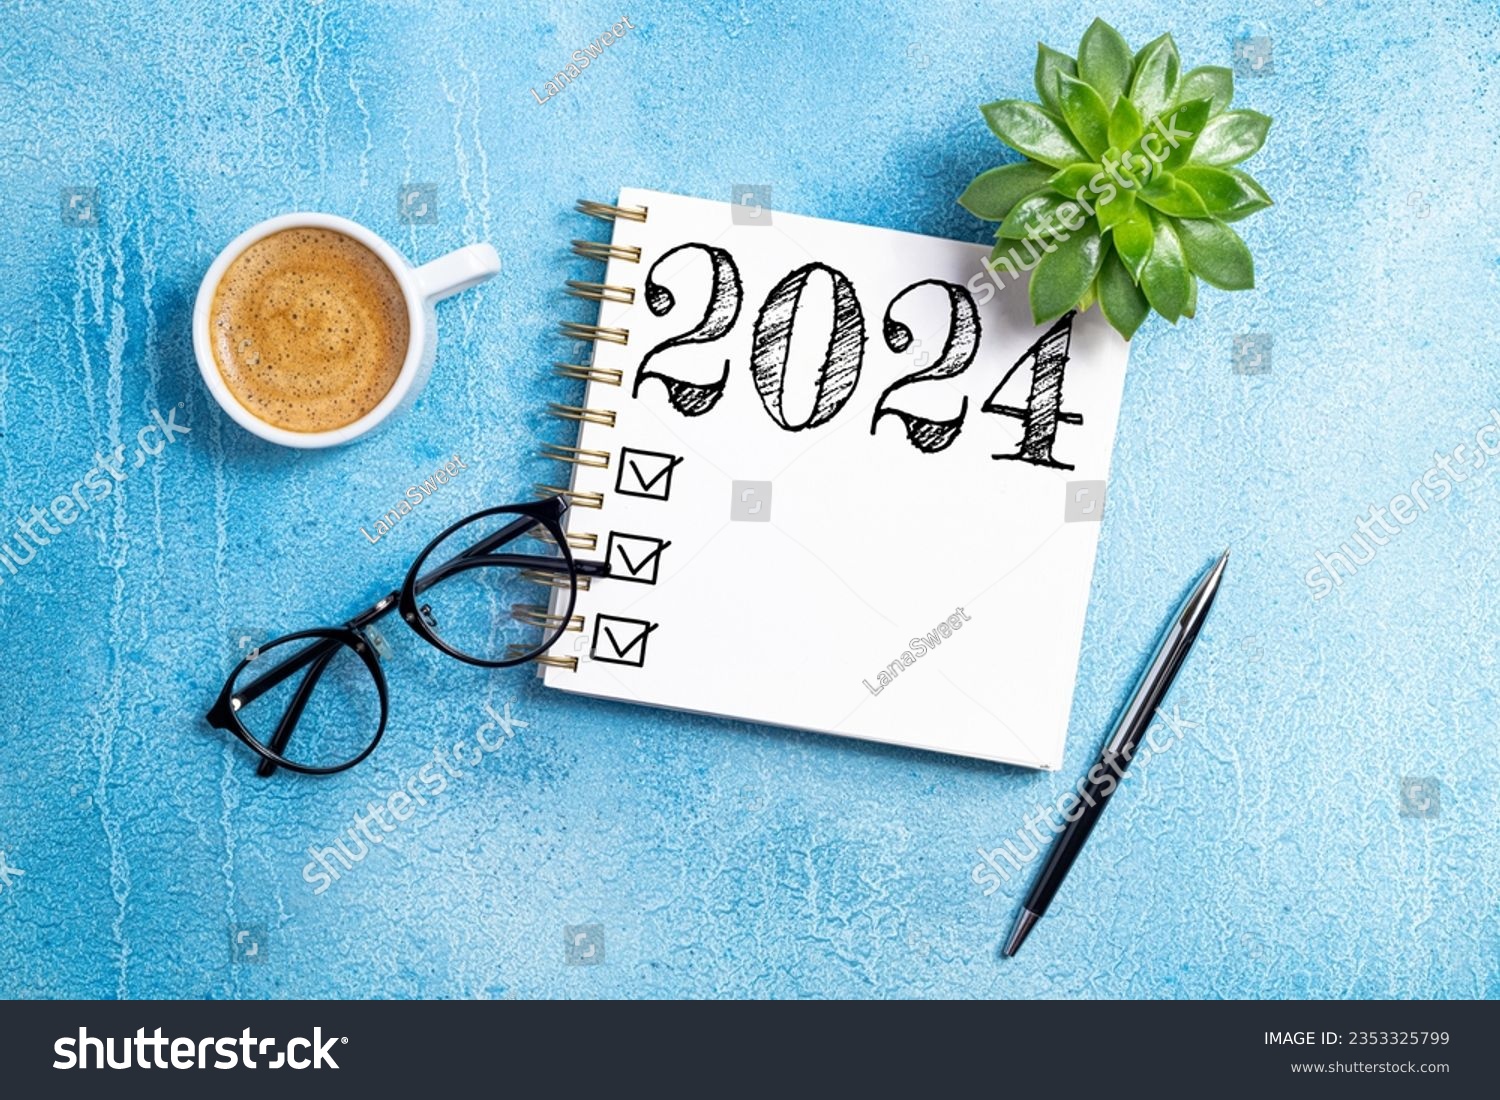 New year resolutions 2024 on desk. 2024 goals list with notebook, coffee cup, plant on blue table. New Year 2024 resolutions. Resolutions, plan, goals, action, checklist, idea concept. Copy space #2353325799